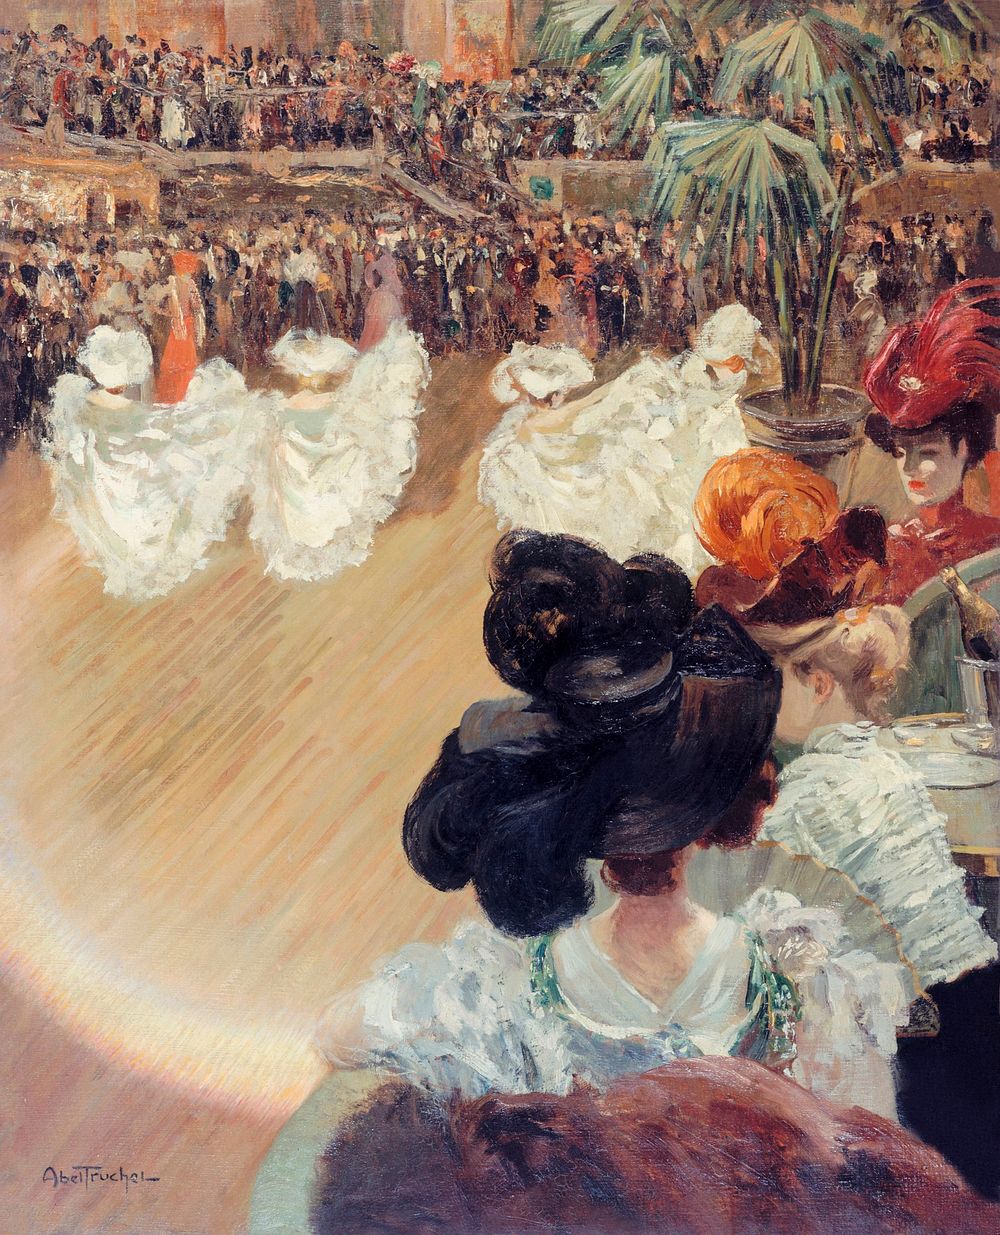 Quadrille at the Tabarin Ball (1906) by Louis Abel-Truchet. The City of Paris' Museums. Digitally enhanced by rawpixel.